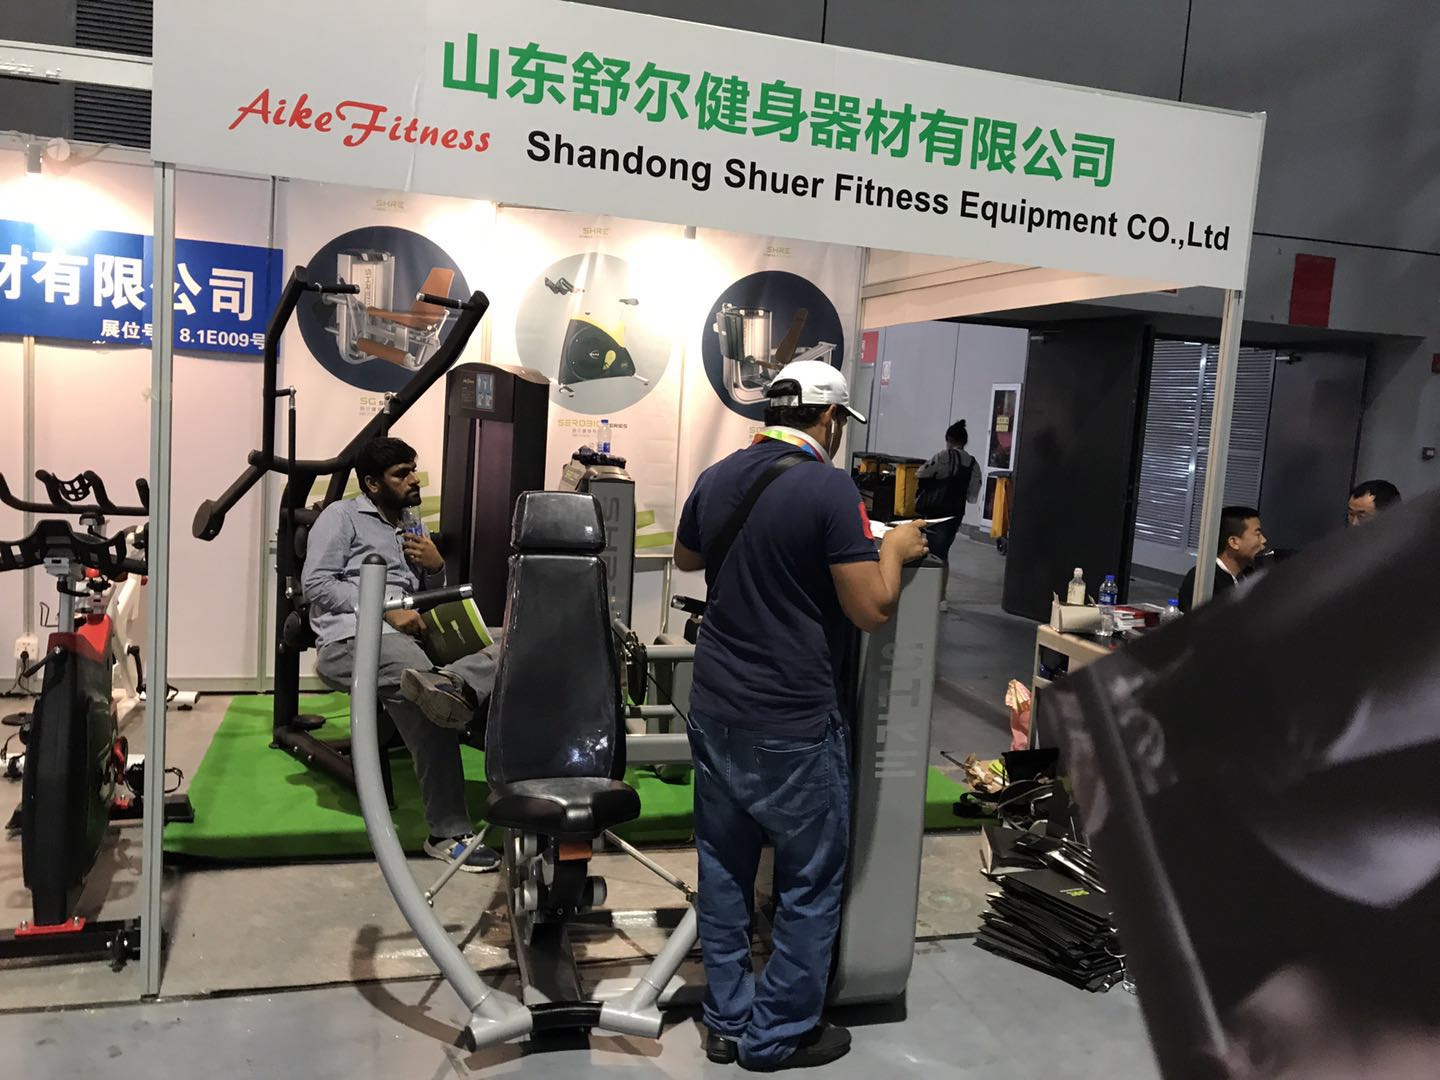 aikefitness in sports show 2017